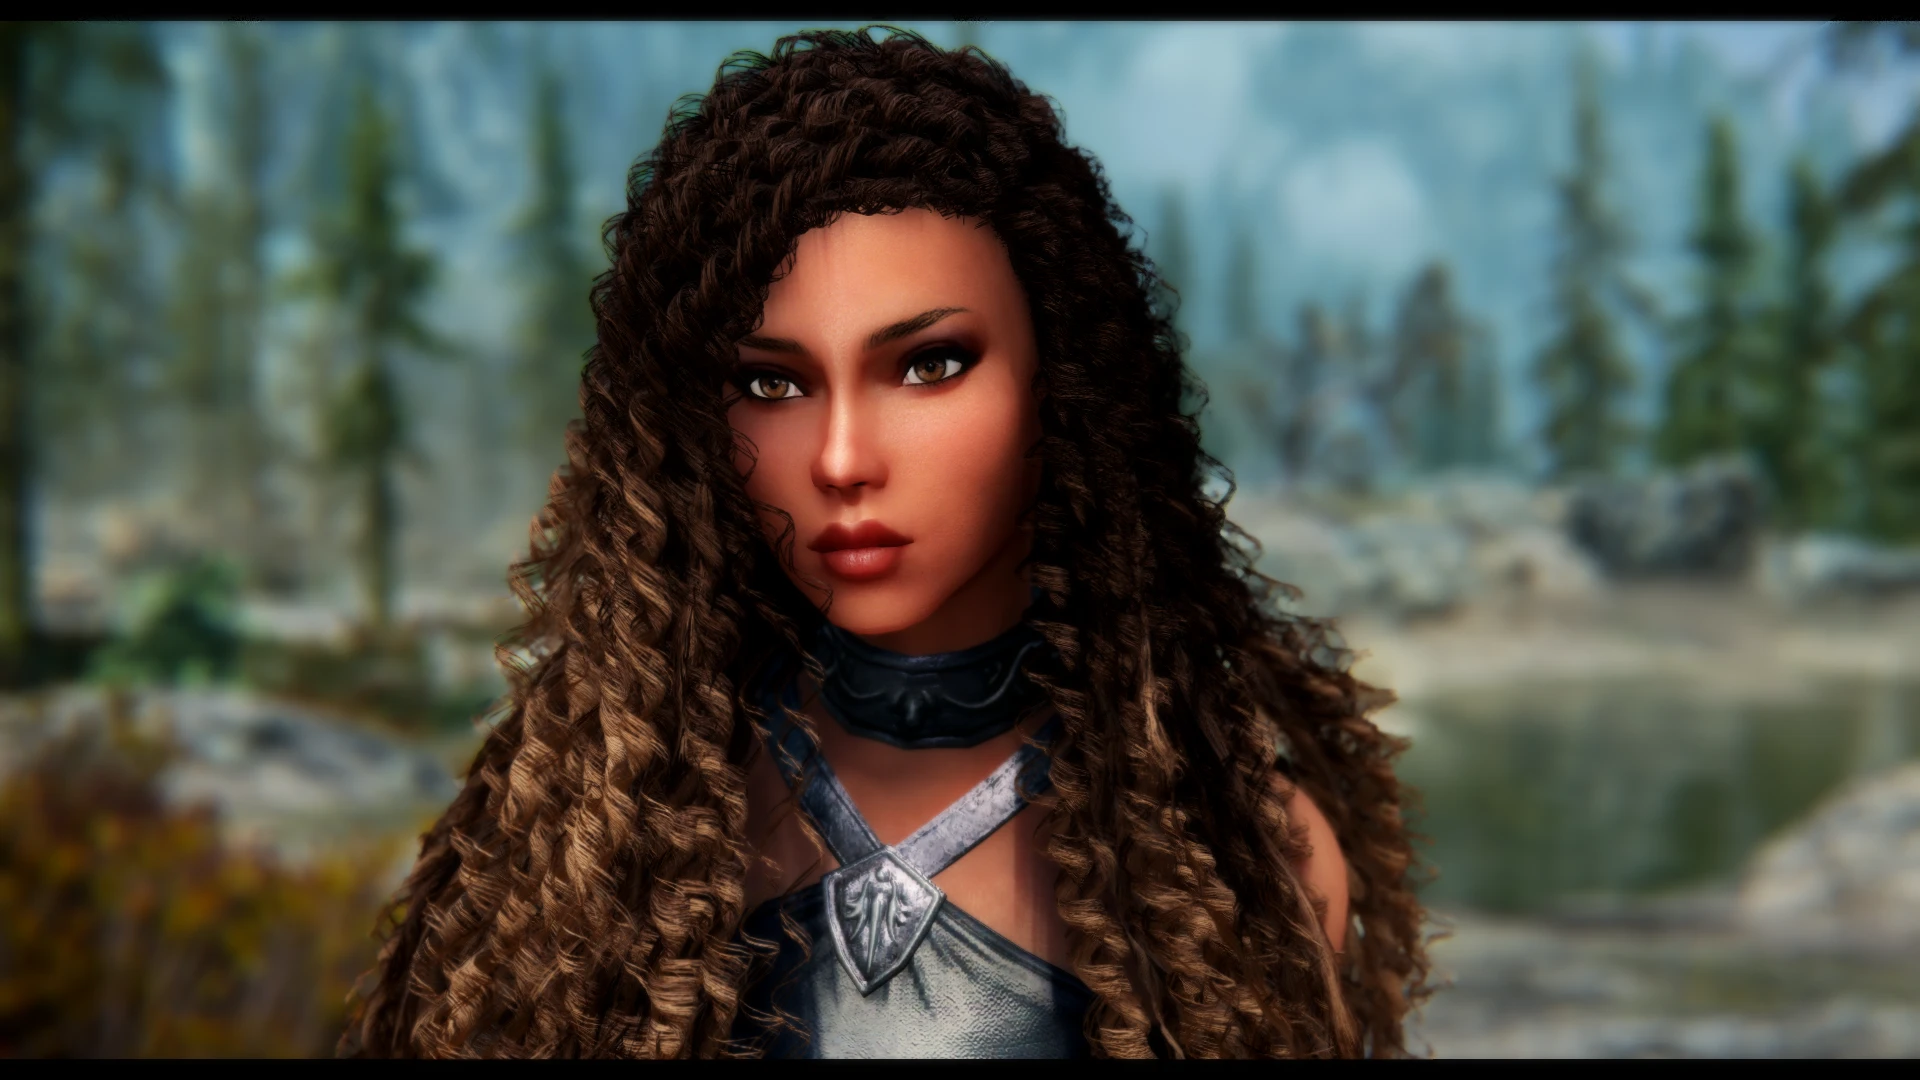 skyrim special edition how to change npc hair from console commands